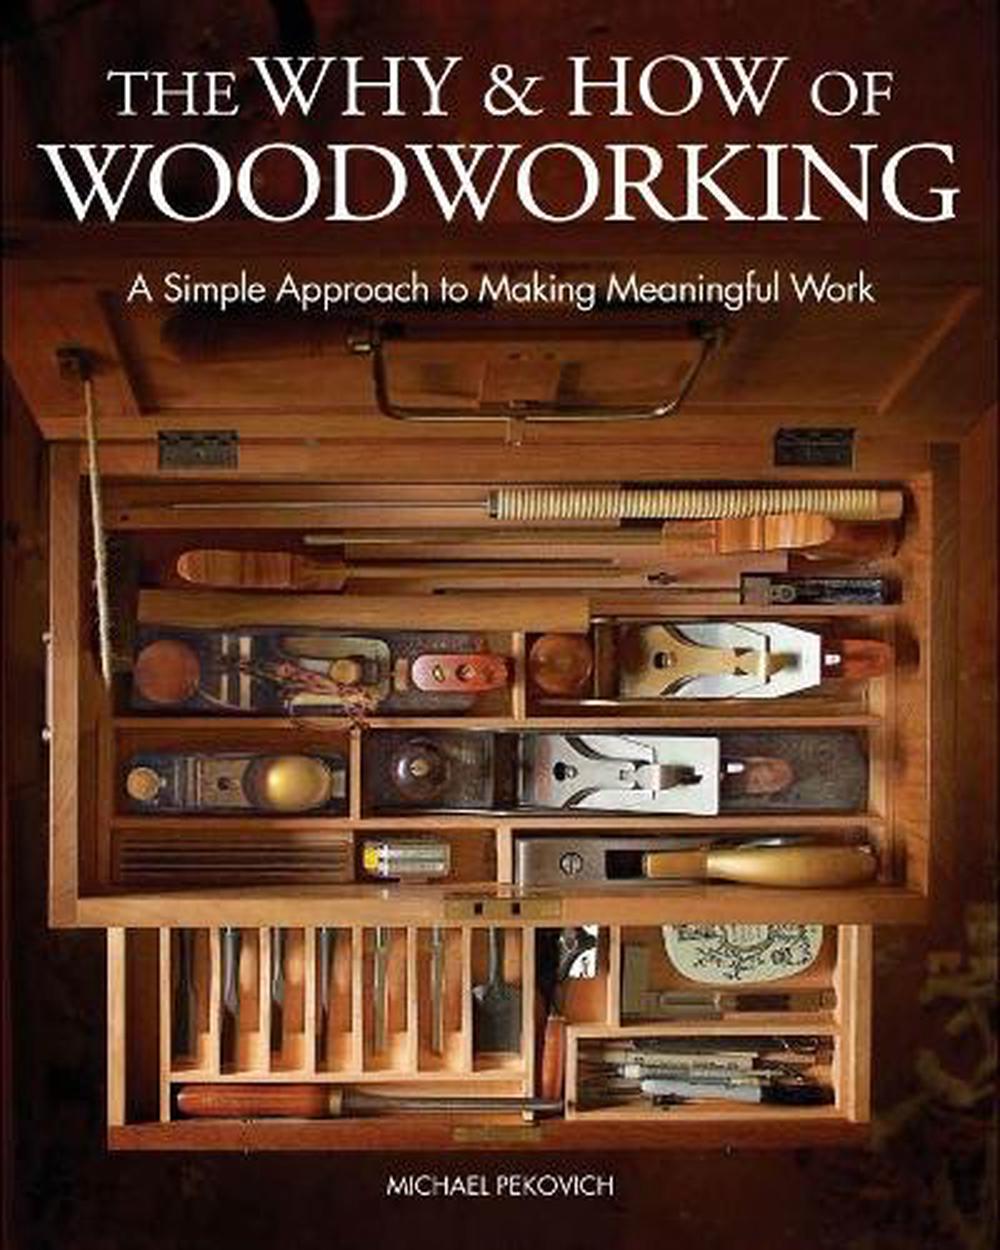 The Why How Of Woodworking By Michael Pekovich Hardcover 9781631869273 Buy Online At The Nile